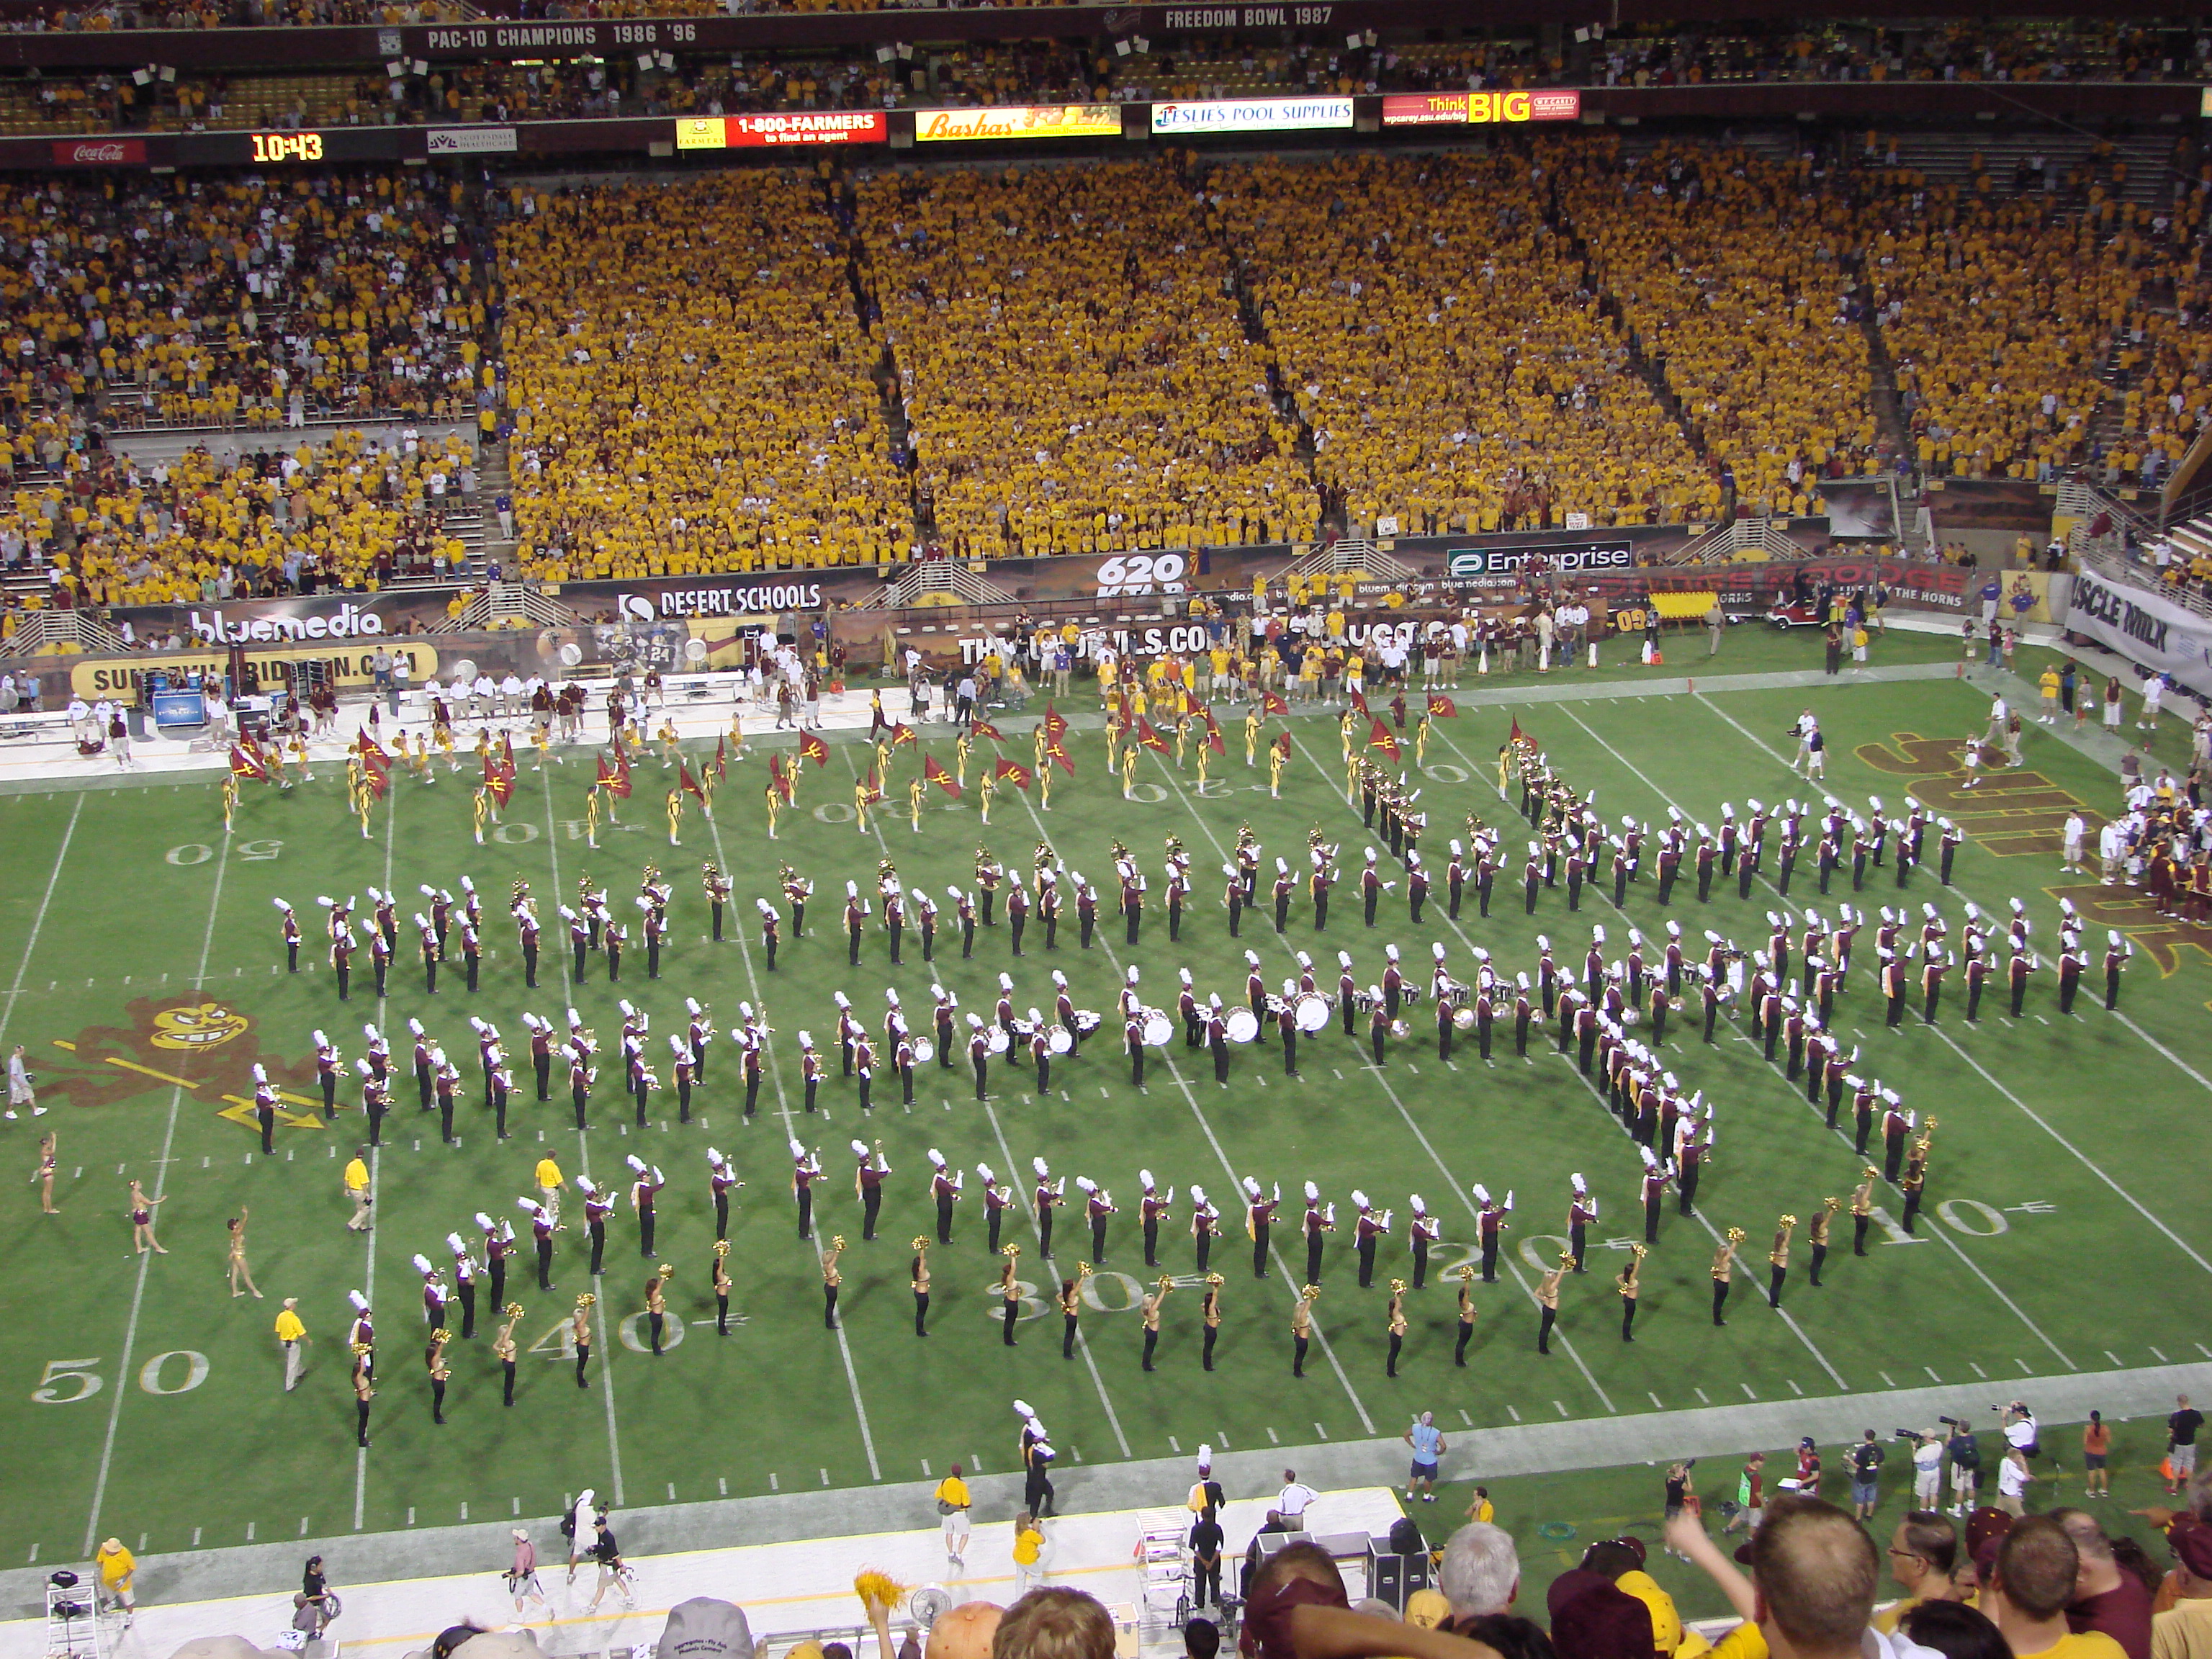 Marching band on the field.